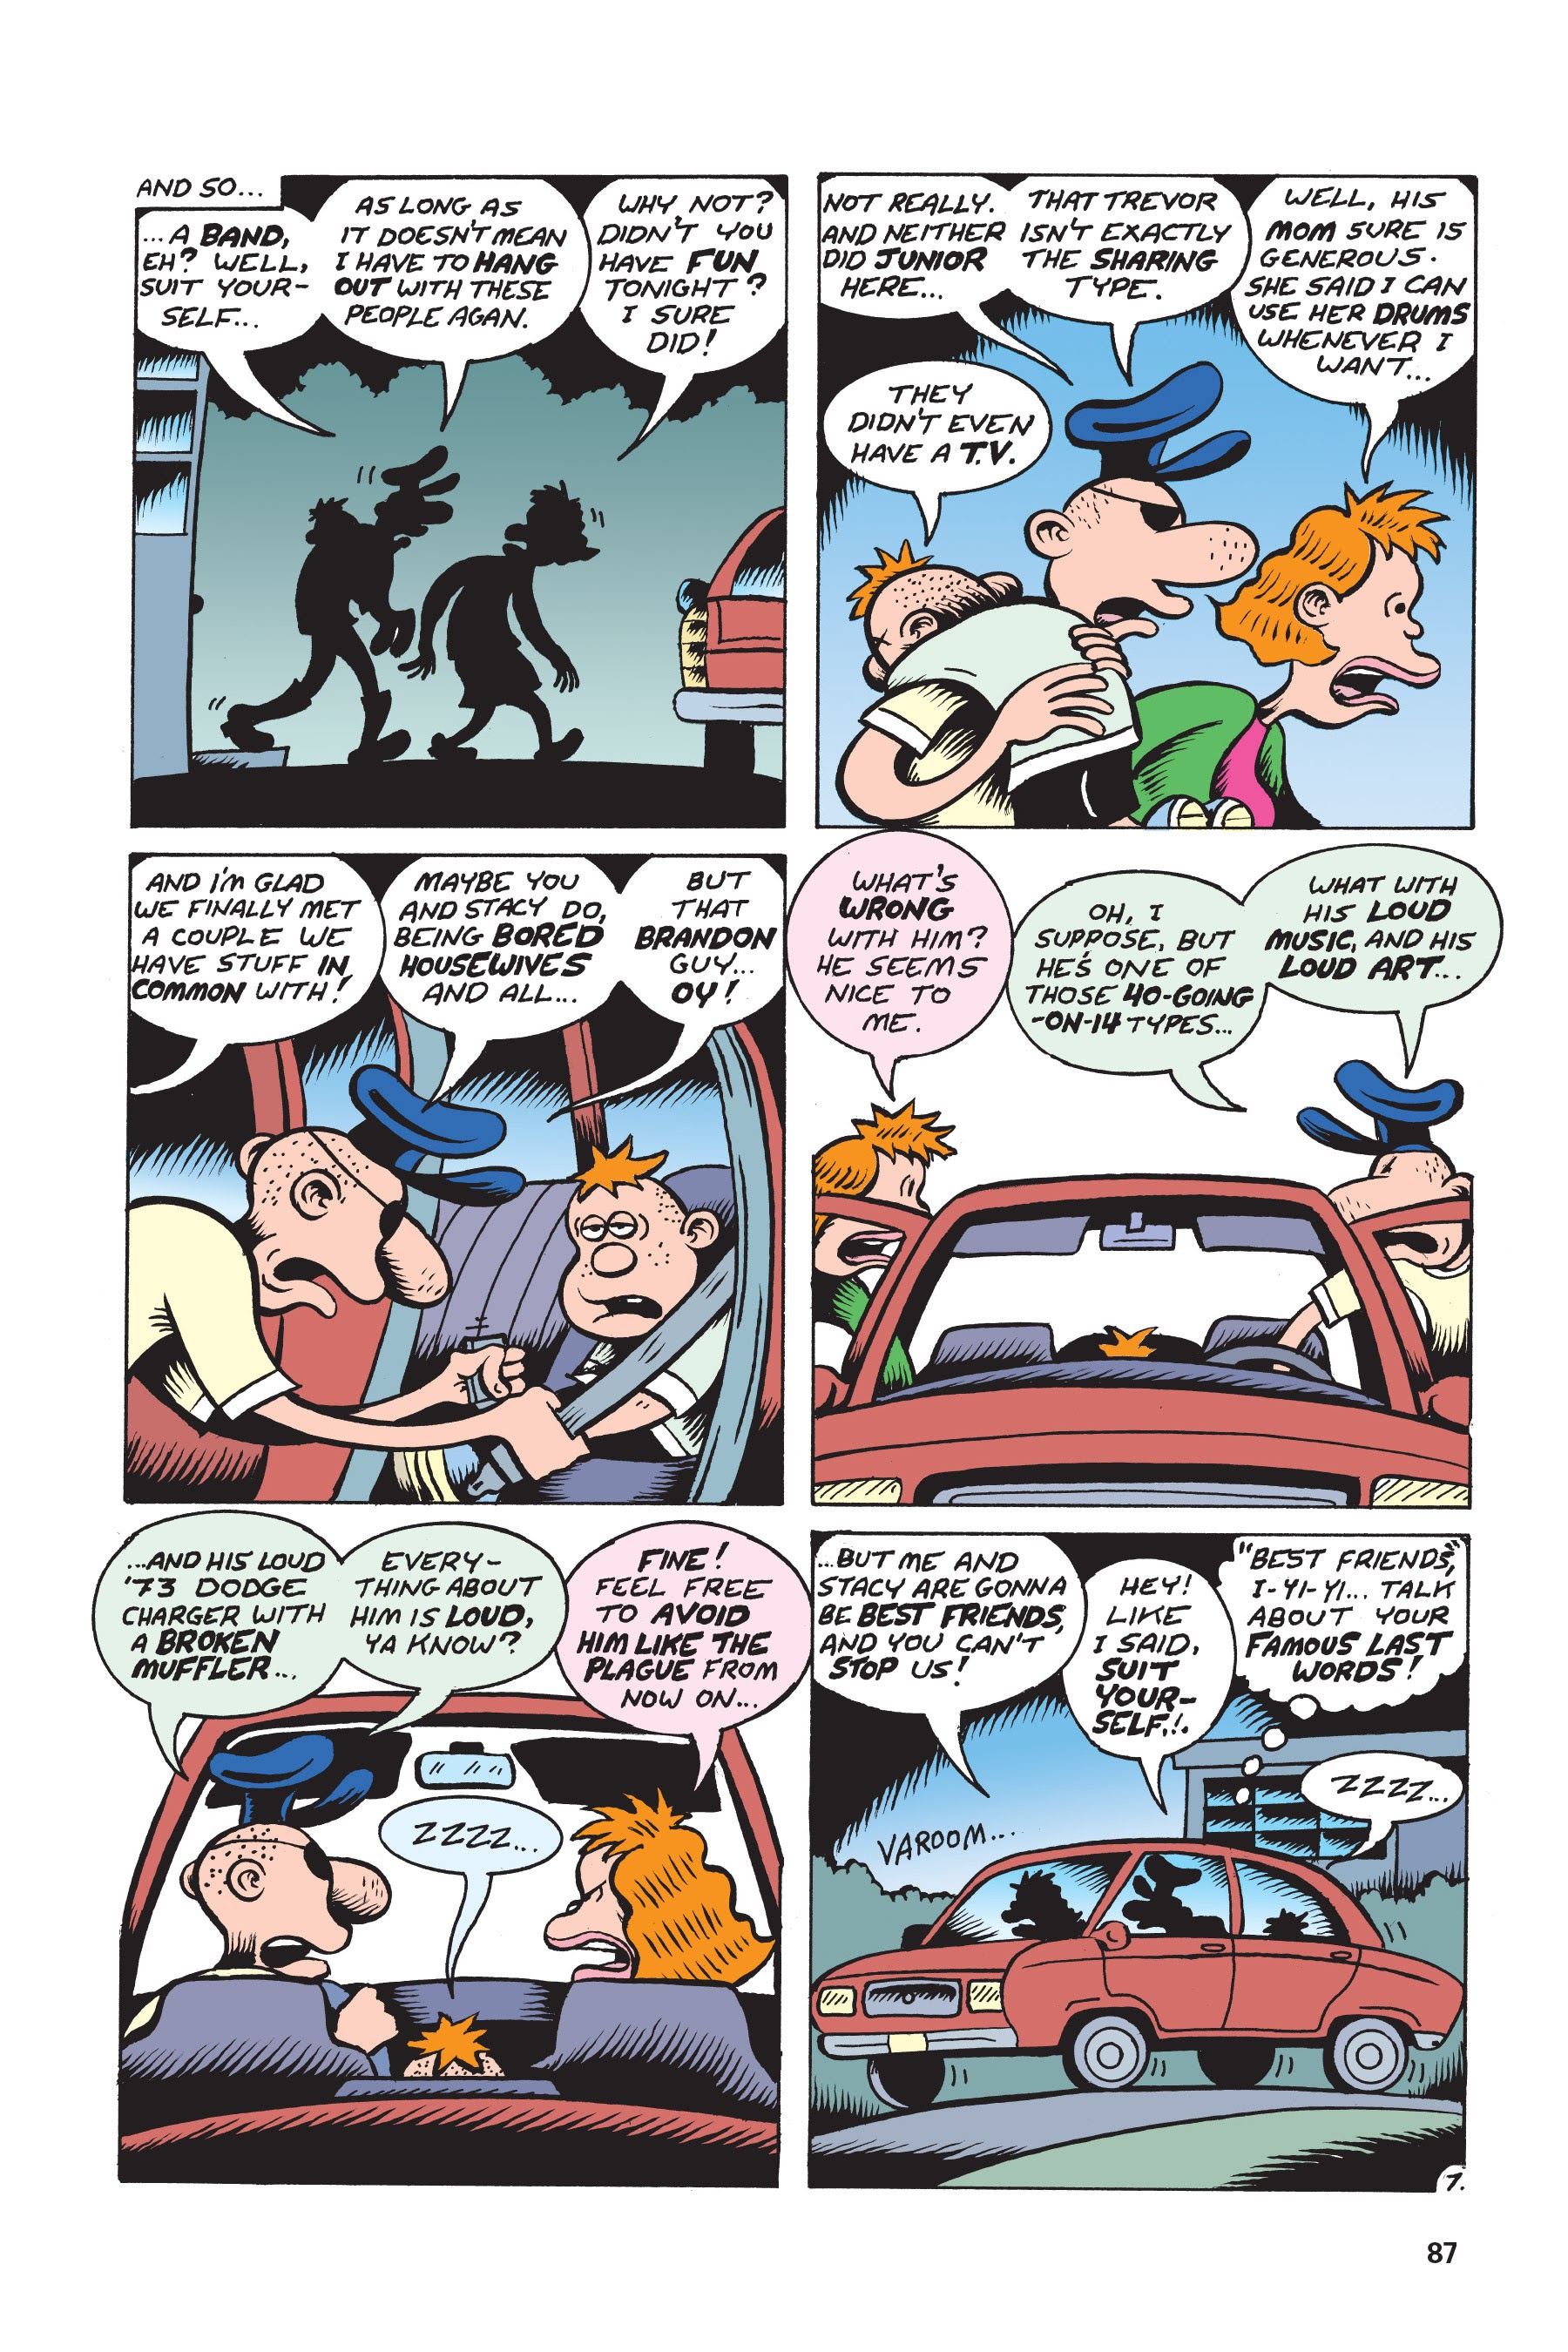 Read online Buddy Buys a Dump comic -  Issue # TPB - 87